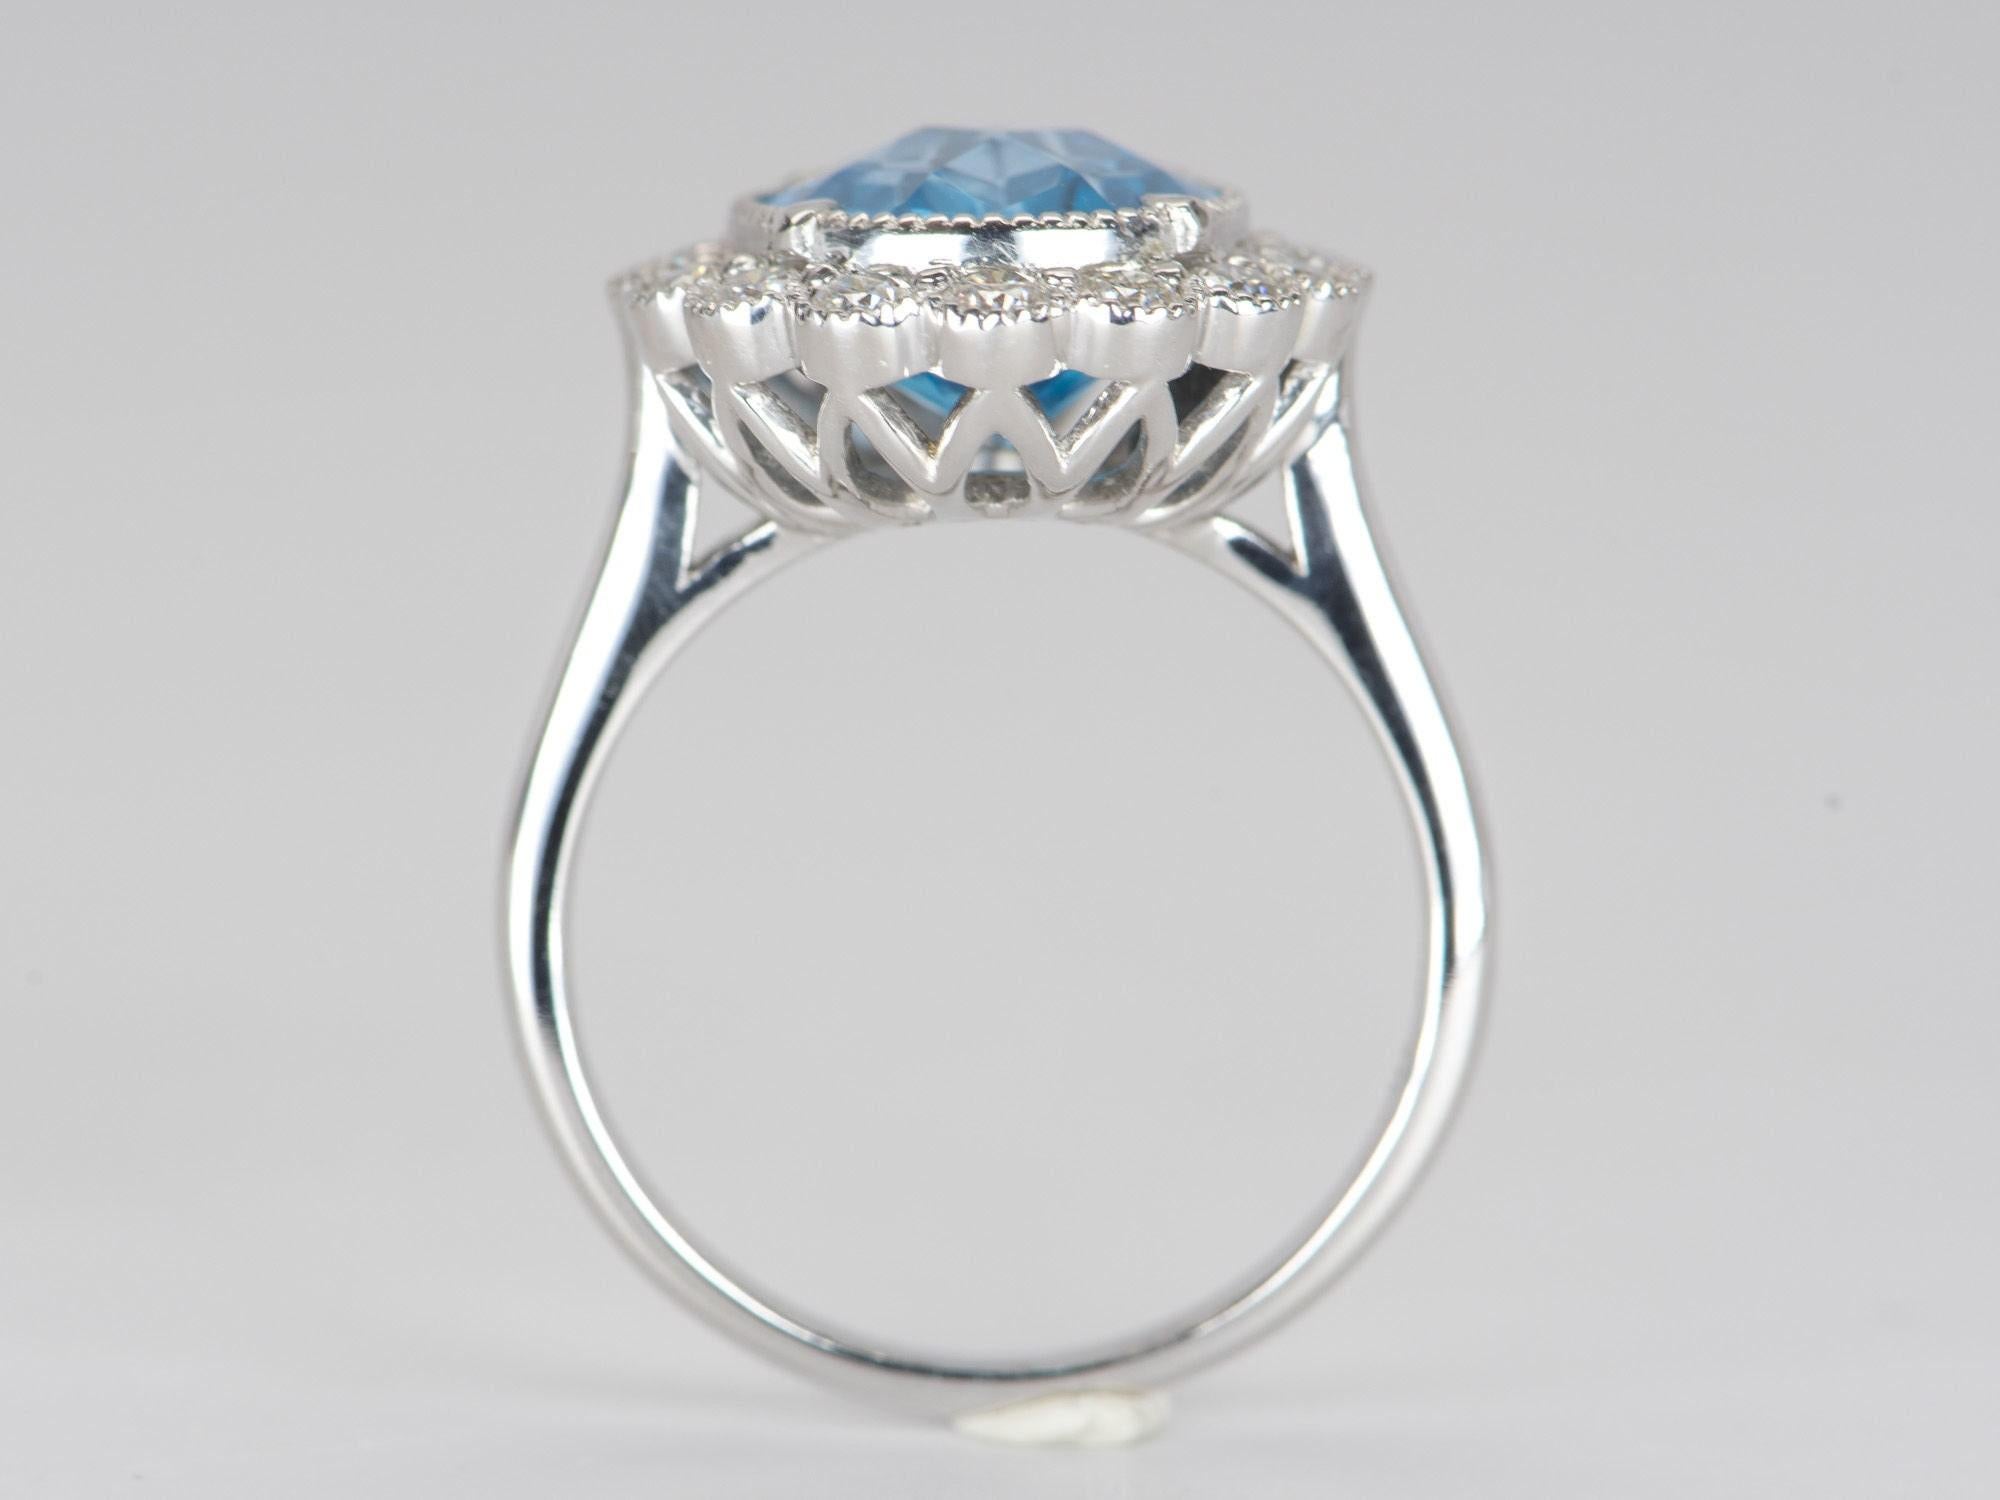 Oval Cut 5.27ct Swiss Blue Topaz with Moissanite Halo 9K White Gold Statement Ring R6305 For Sale